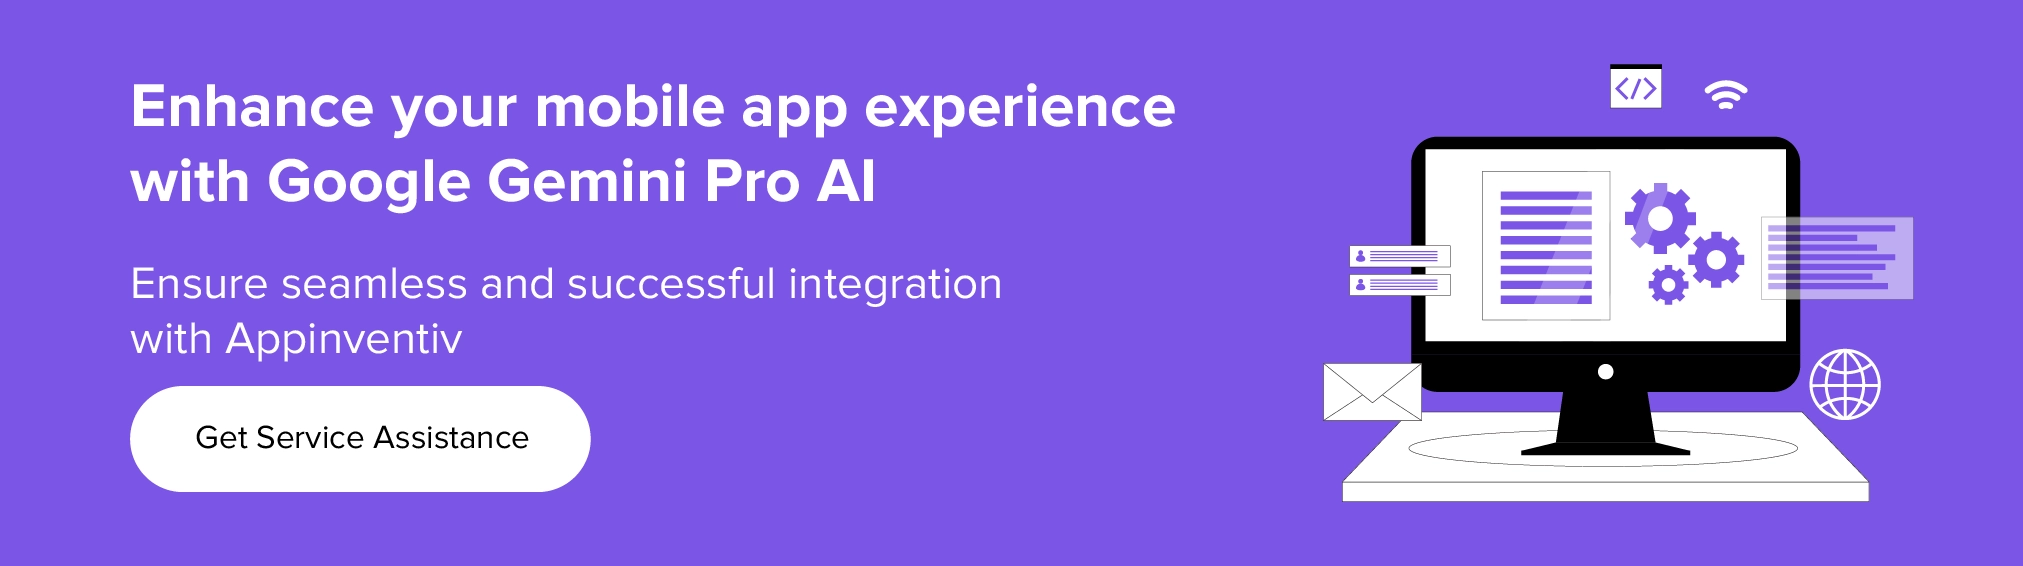 Enhance your mobile app experience with Google Gemini Pro AI